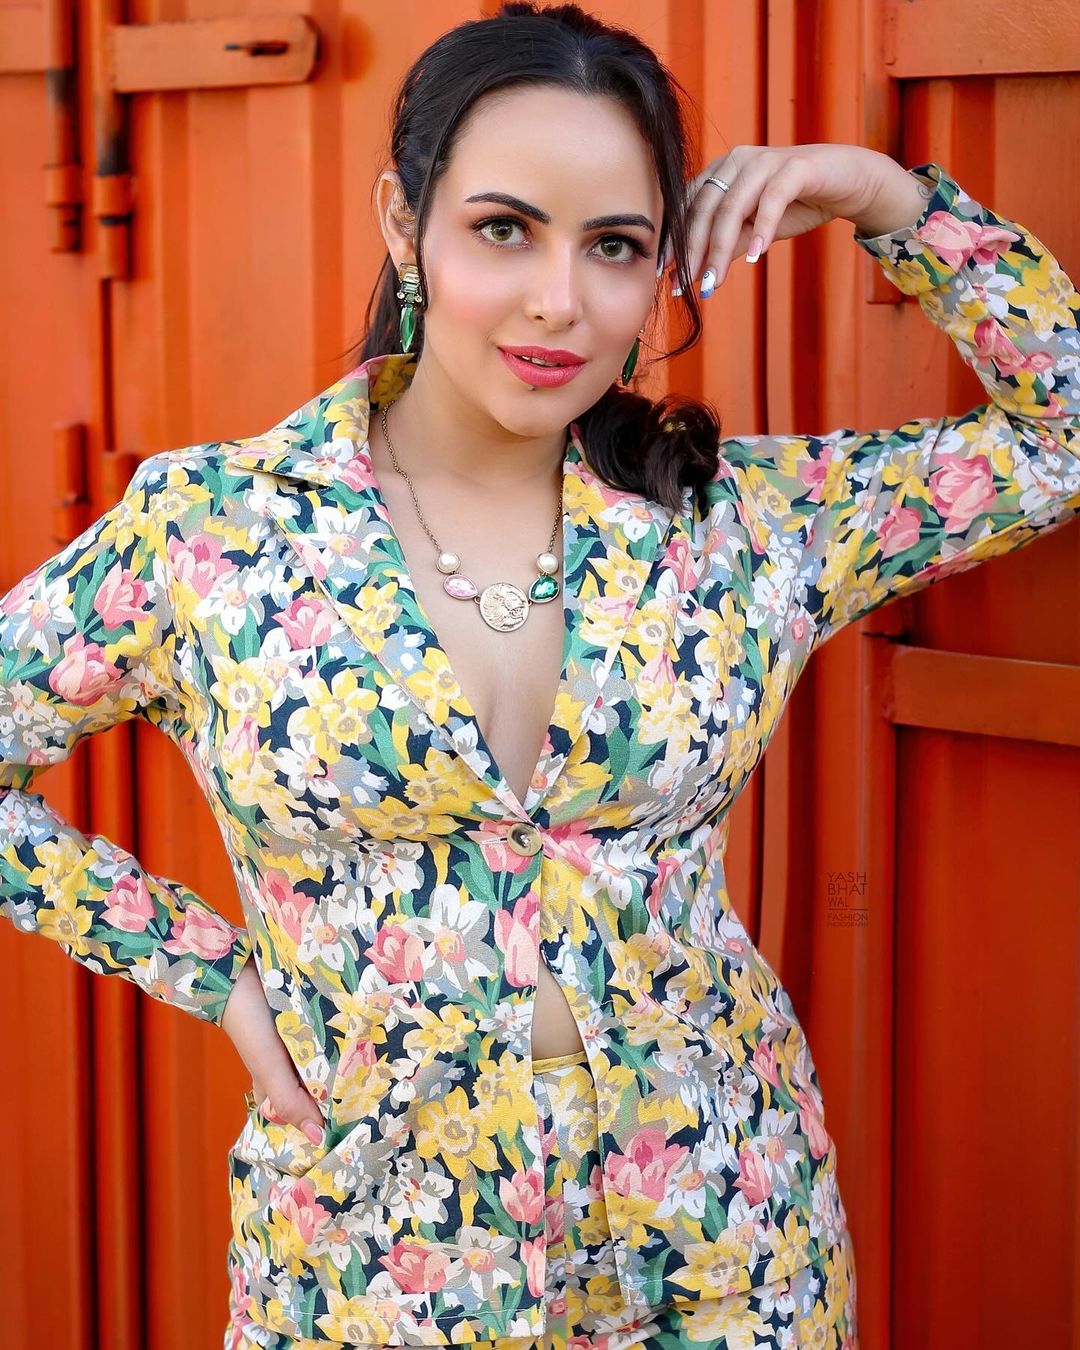 Anchal munjal is winning the hearts of guys with her floral print blazer charms-Aanchal Munjal, Aanchalmunjal, Anchal Munjal Photos,Spicy Hot Pics,Images,High Resolution WallPapers Download